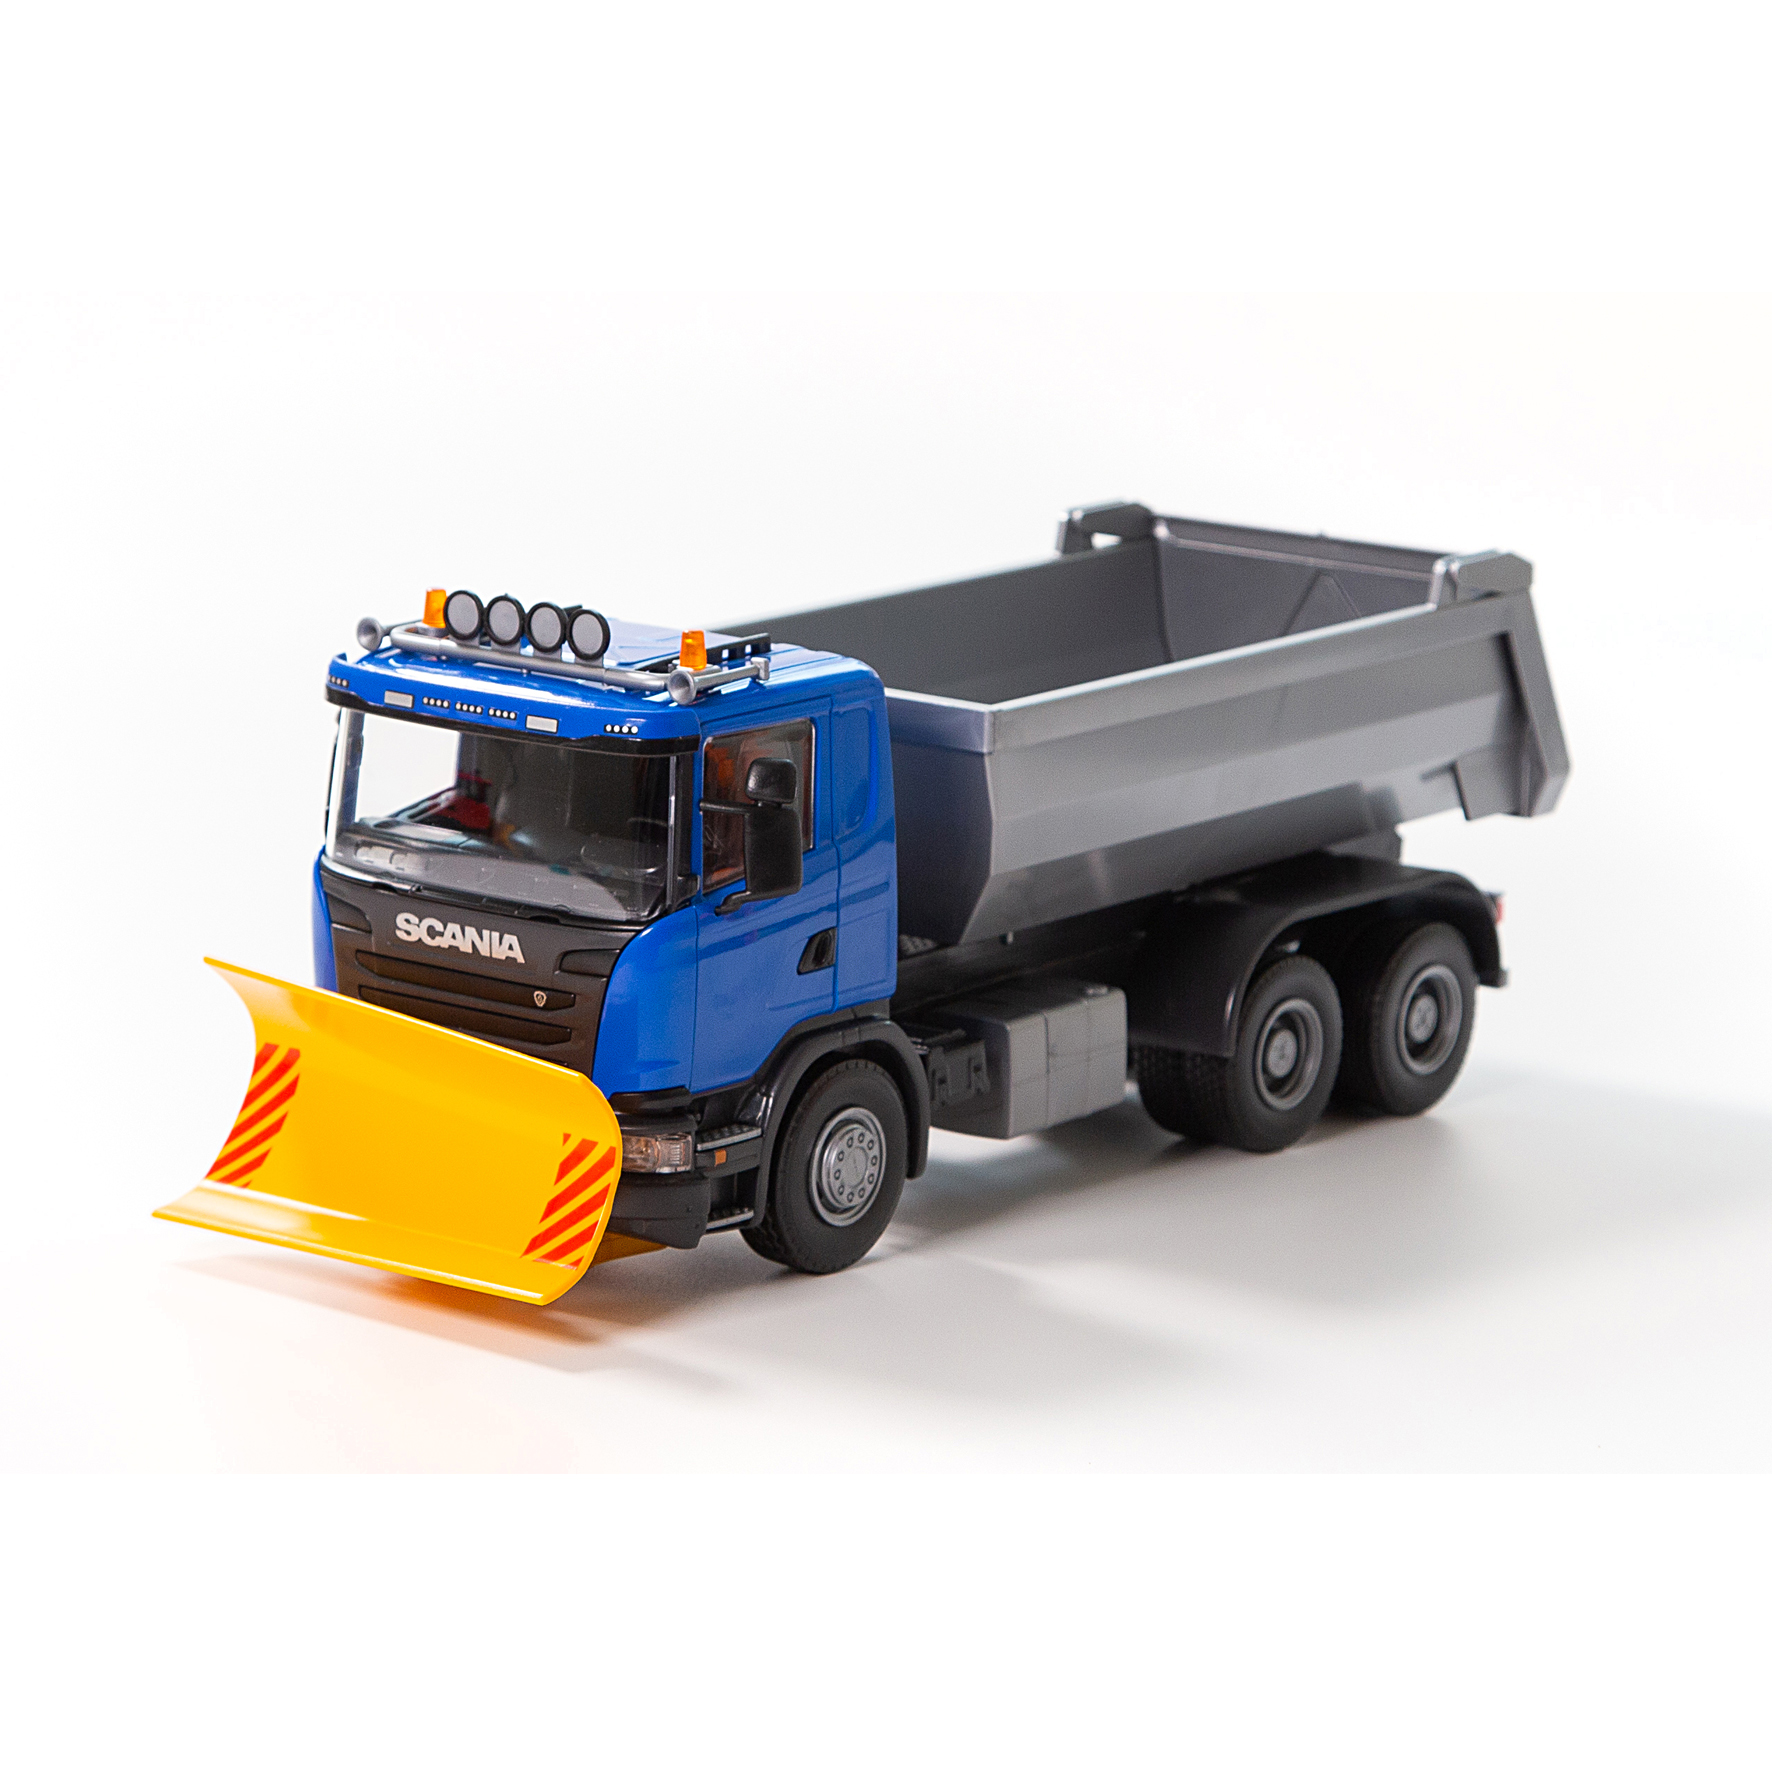 Work Vehicles emek toy car tipper with plow scania blue 1:25